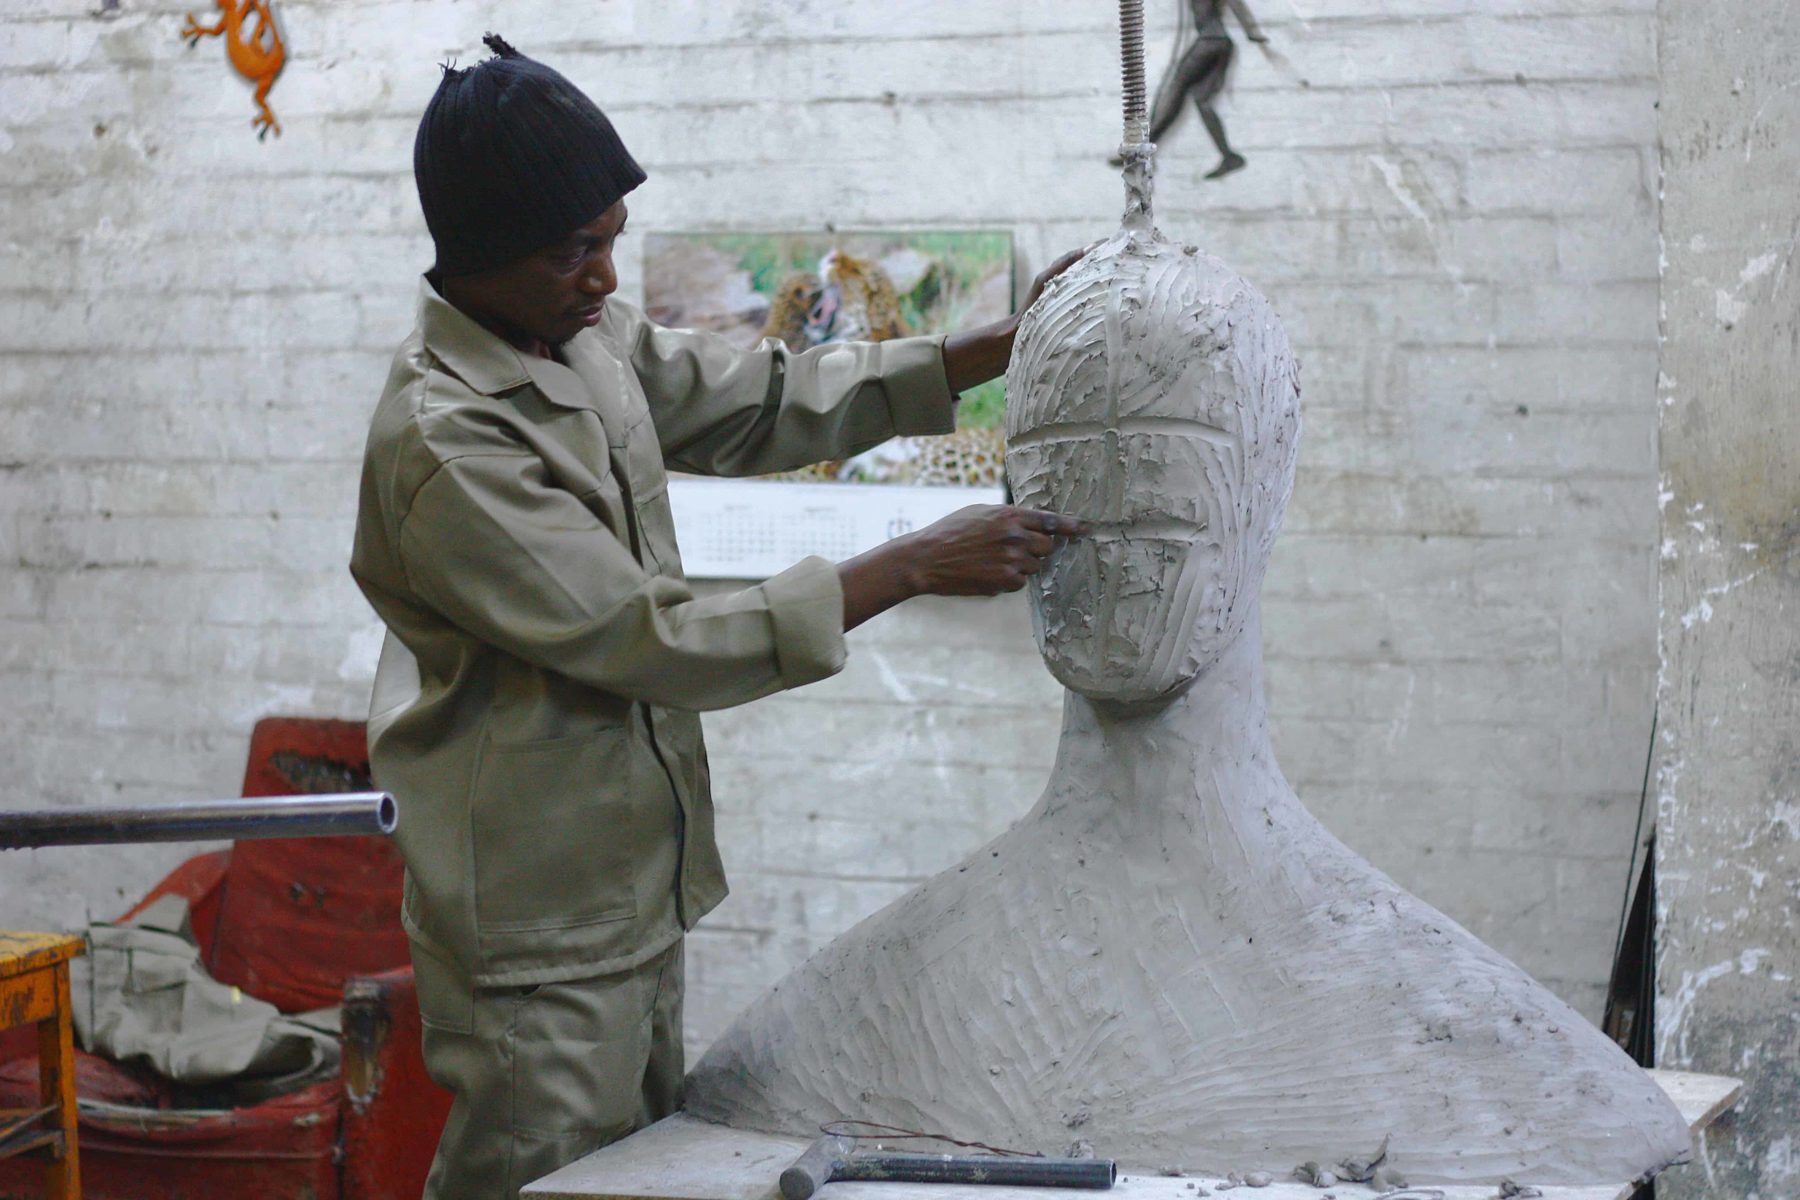 finishing-a-project-sculpture